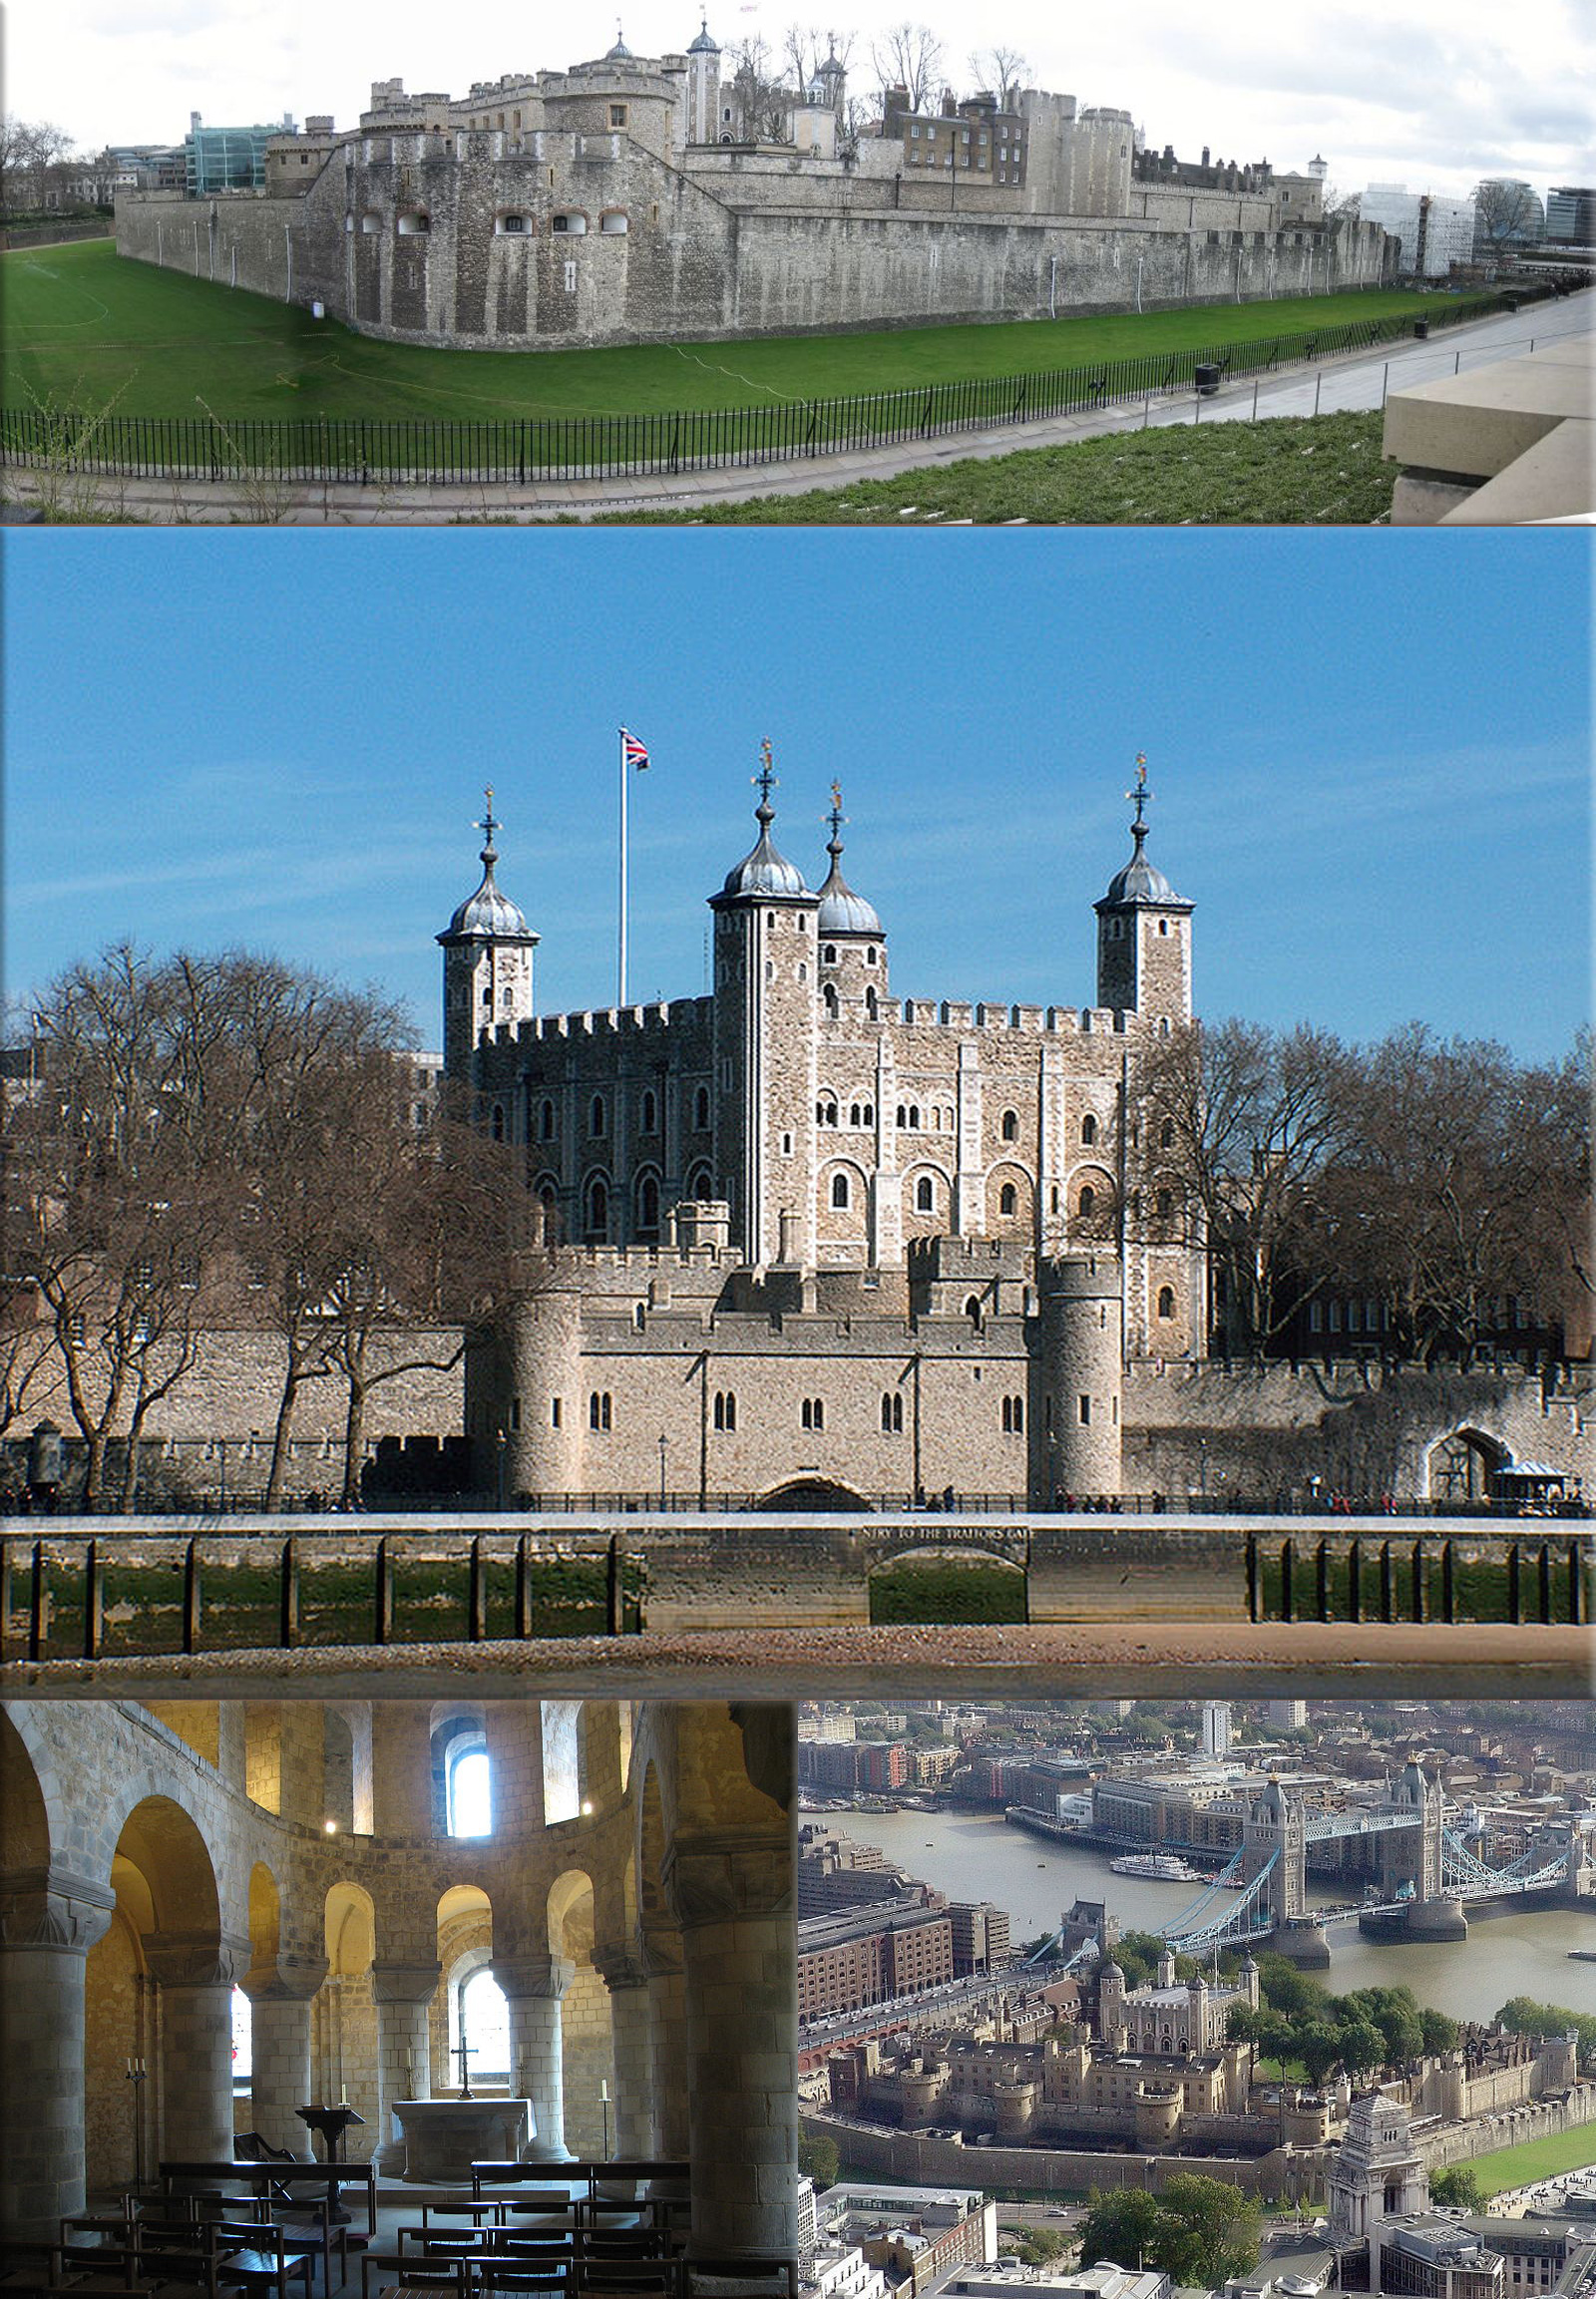 Her Majesty's Royal Palace and Fortress, more commonly known as the Tower of London, is a historic castle on the north bank of the River Thames in central London, England, United Kingdom